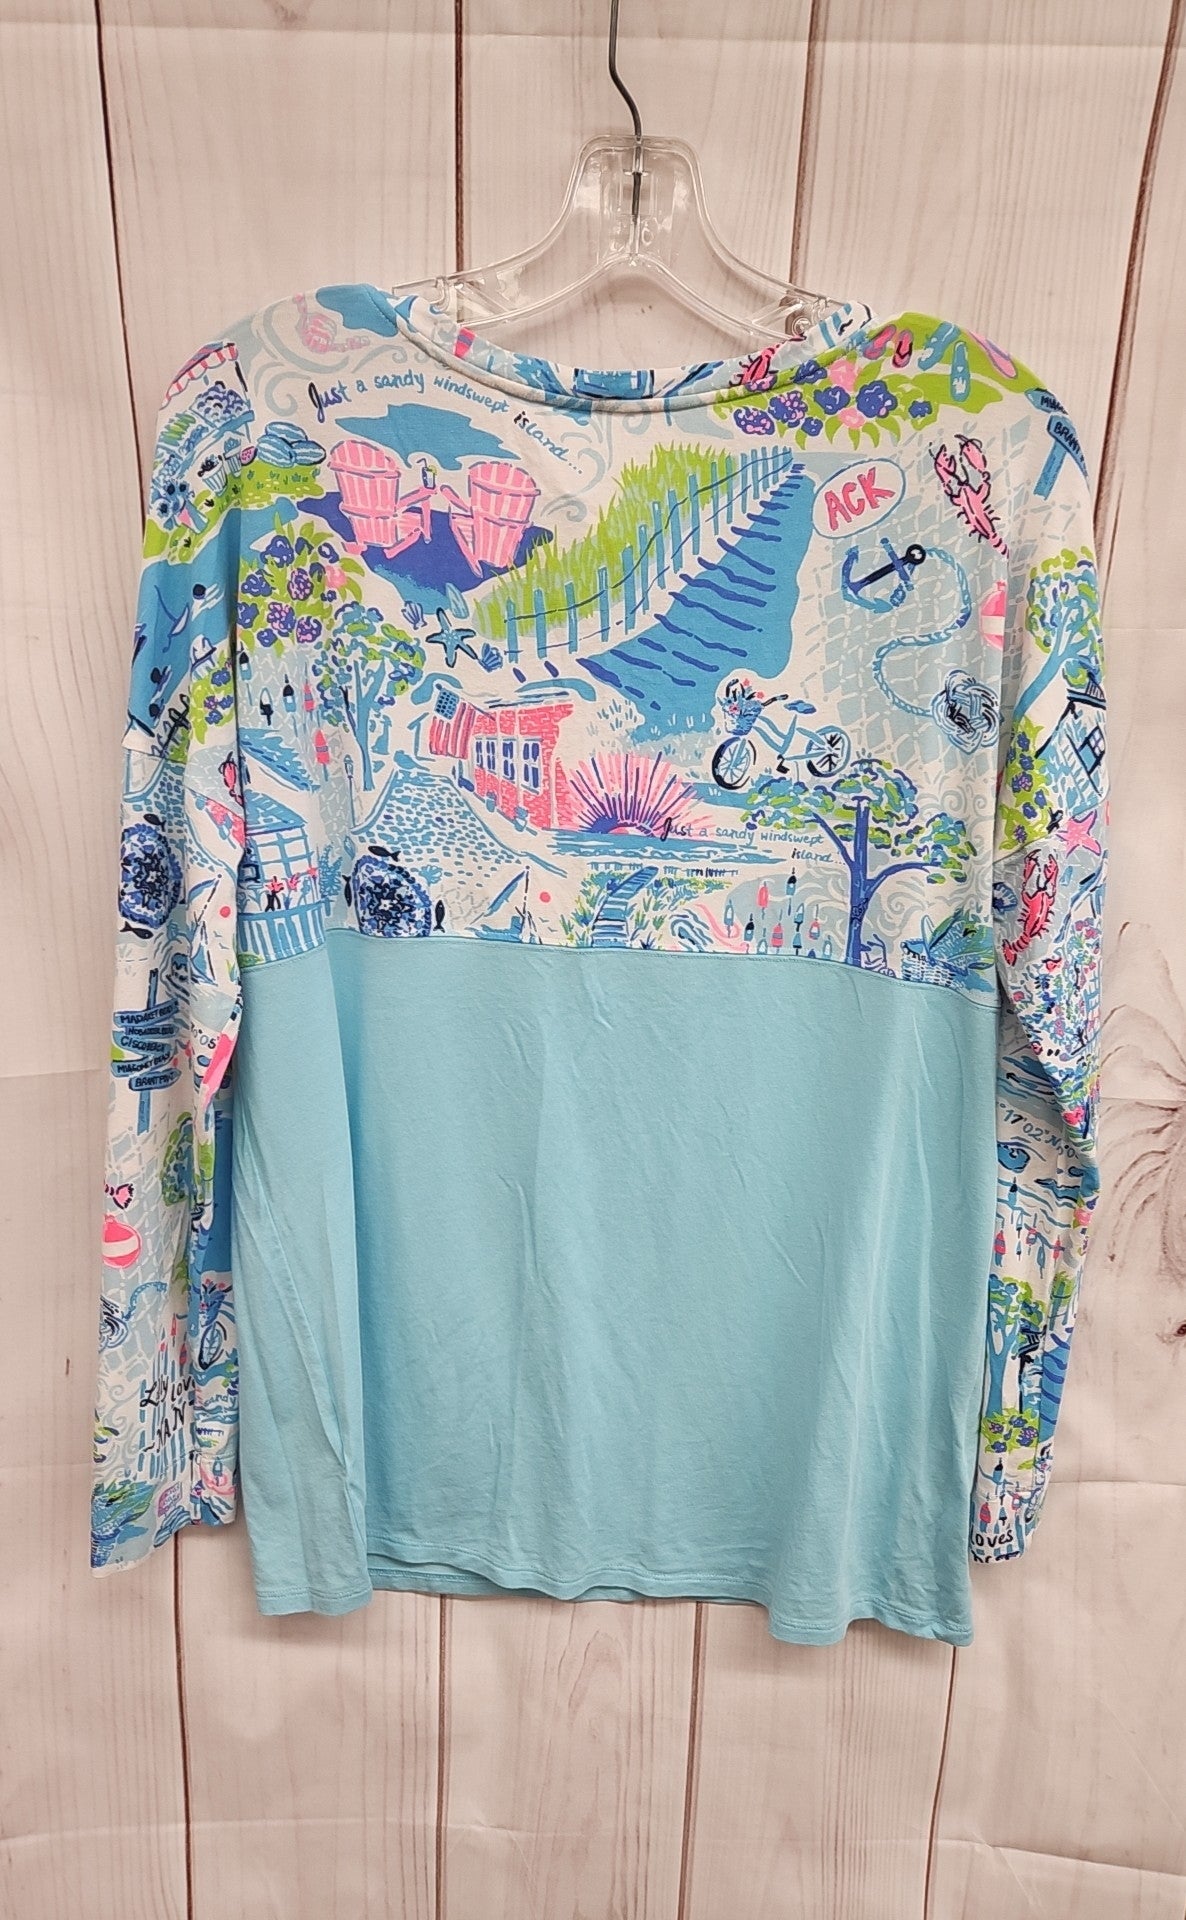 Lilly Pulitzer Women's Size M Blue 3/4 Sleeve Top